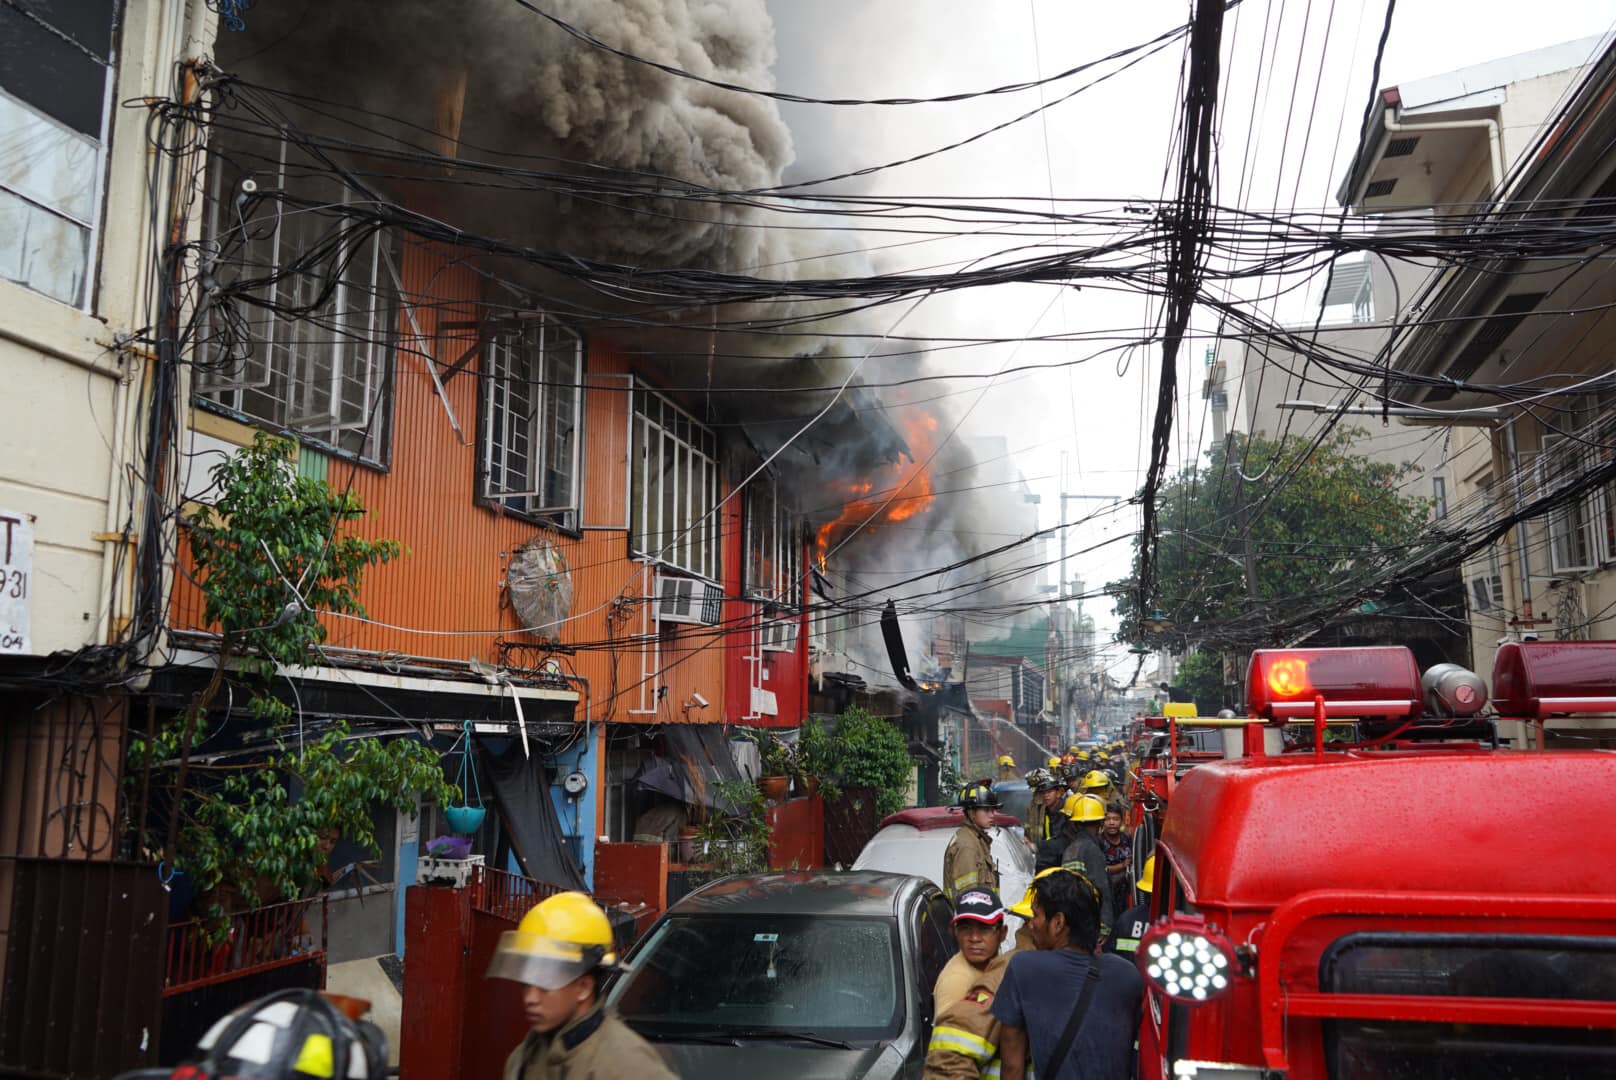 Fire hits 3 residential areas, injures 7 people in Sampaloc, Manila